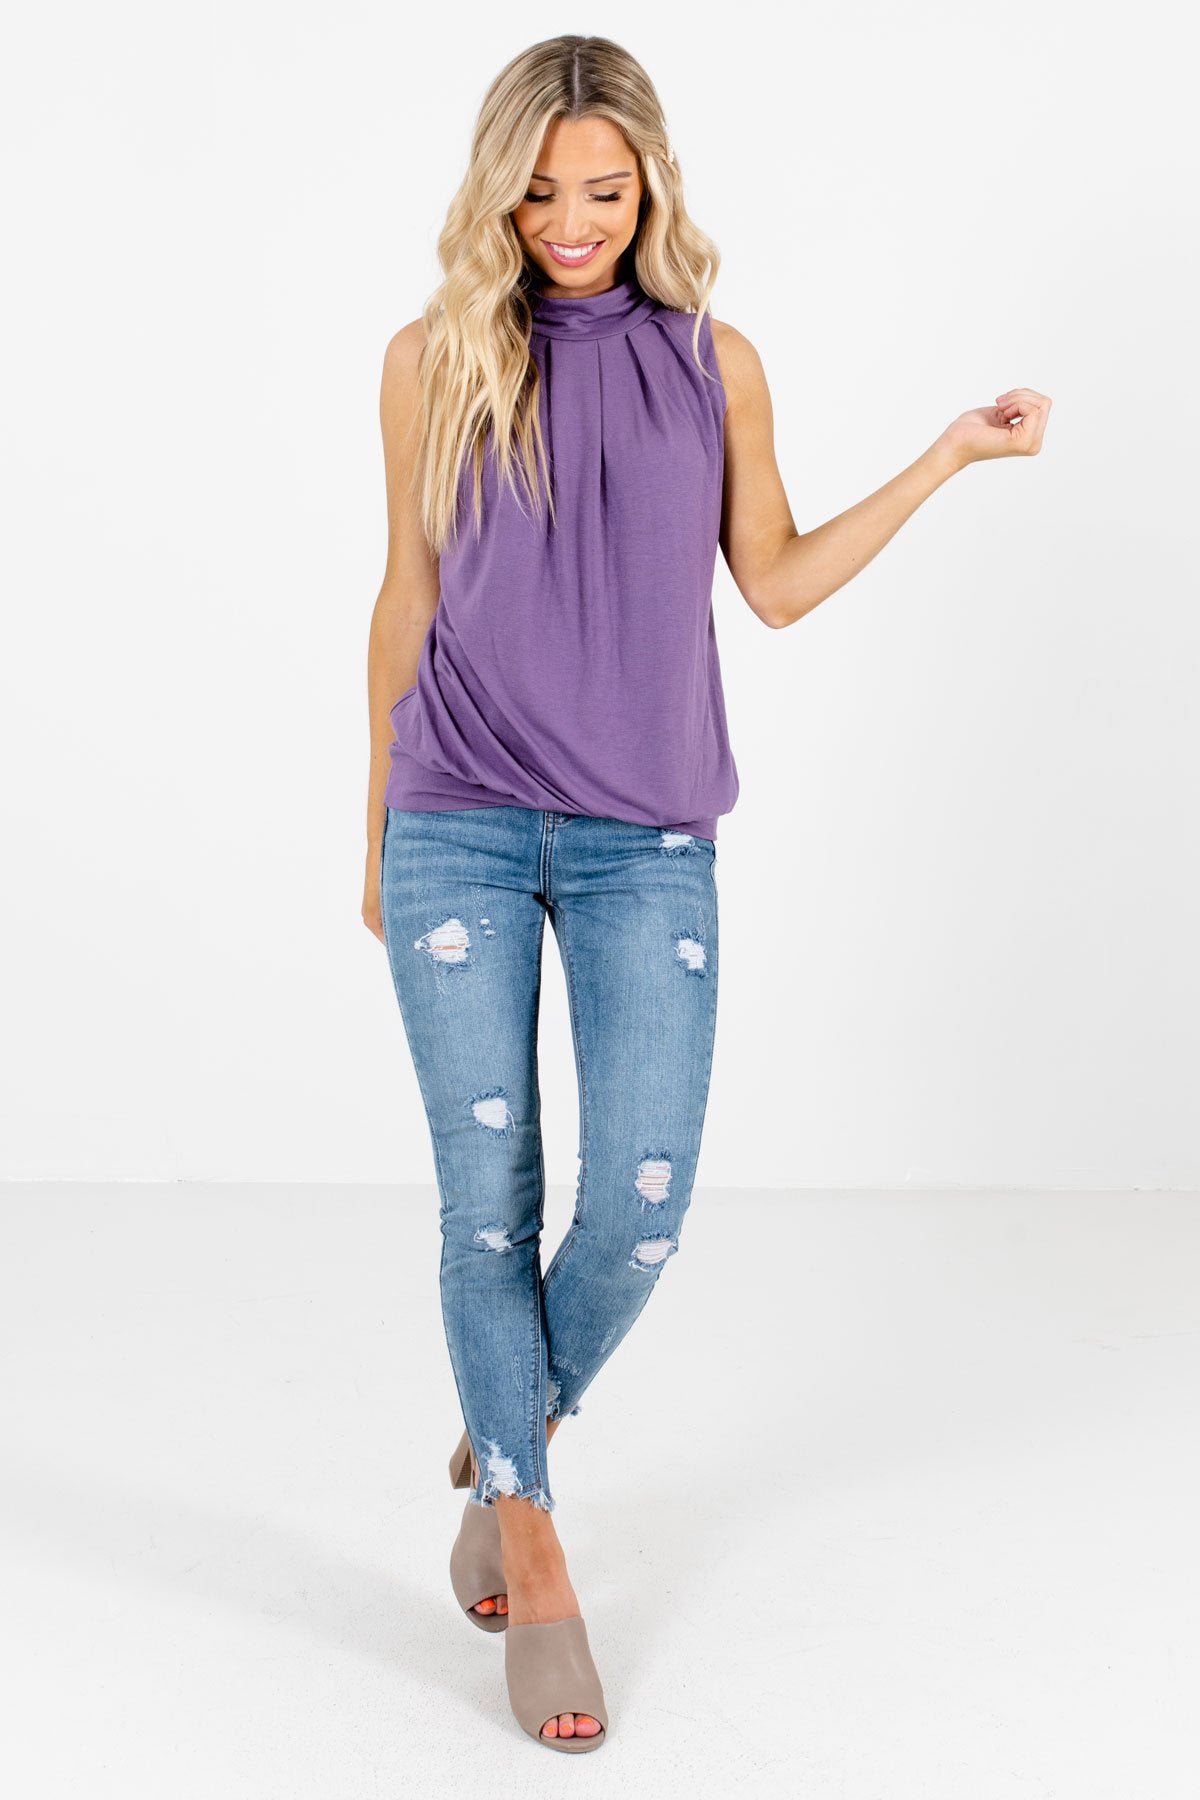 Women’s Purple Spring and Summertime Boutique Clothing